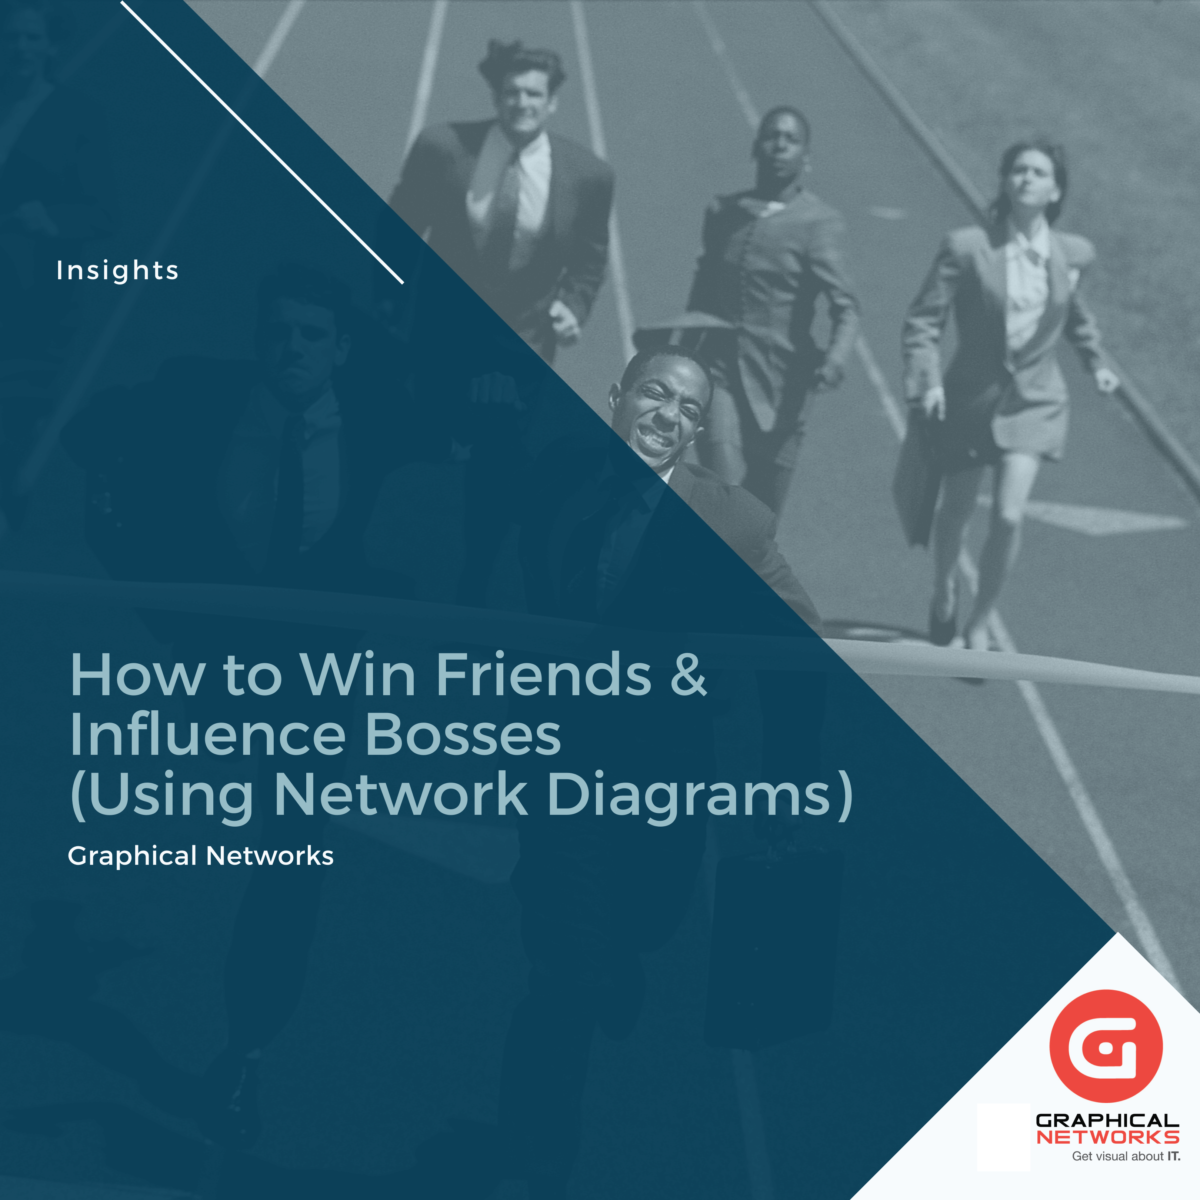 How to Win Friends & Influence Bosses (Using Network Diagrams)